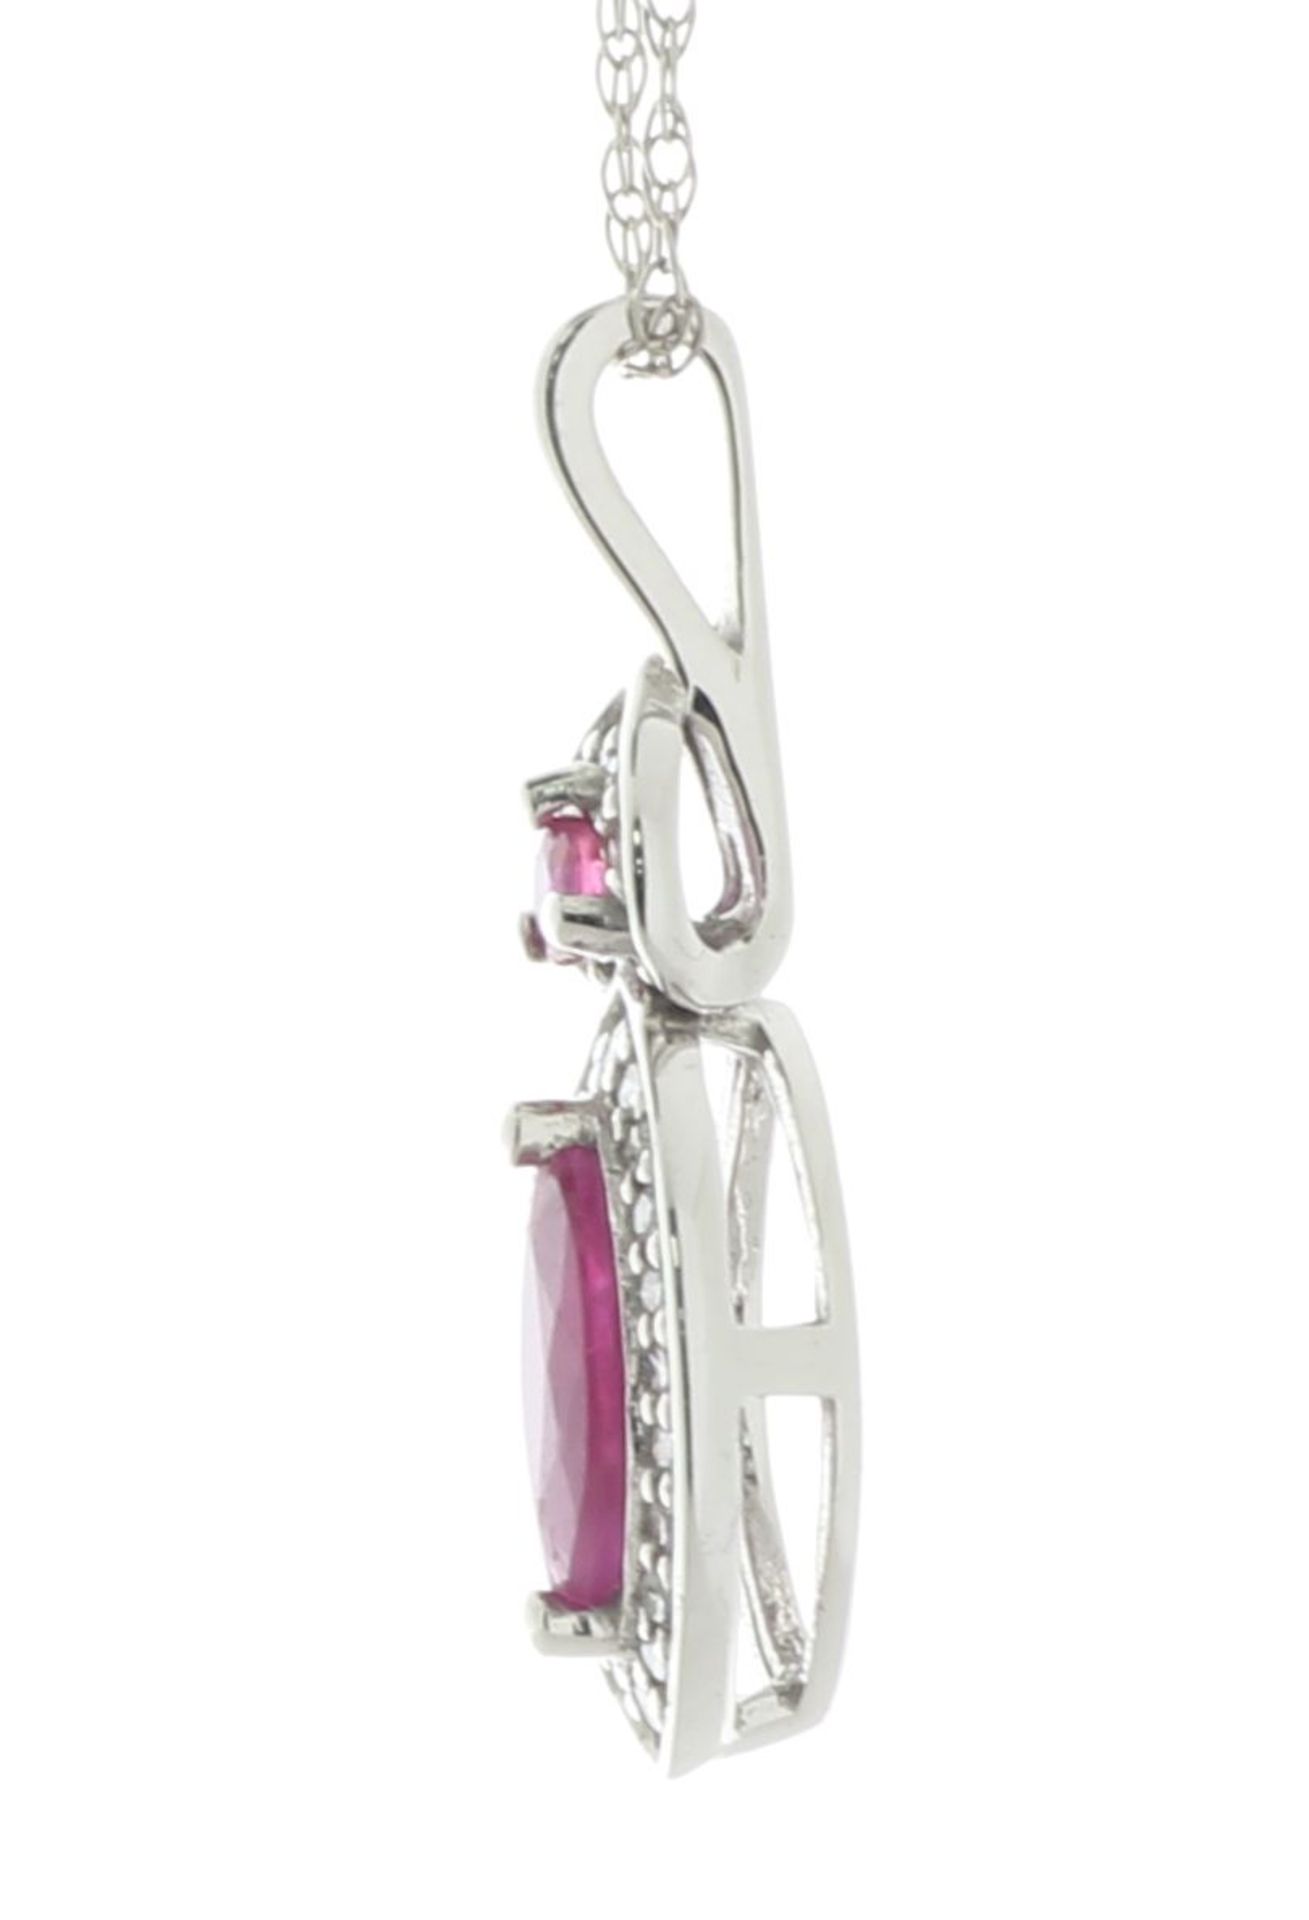 14ct White Gold Marquise Cluster Diamond And Ruby Pendant And chain 0.08 Carats - Valued By IDI £1, - Image 3 of 4